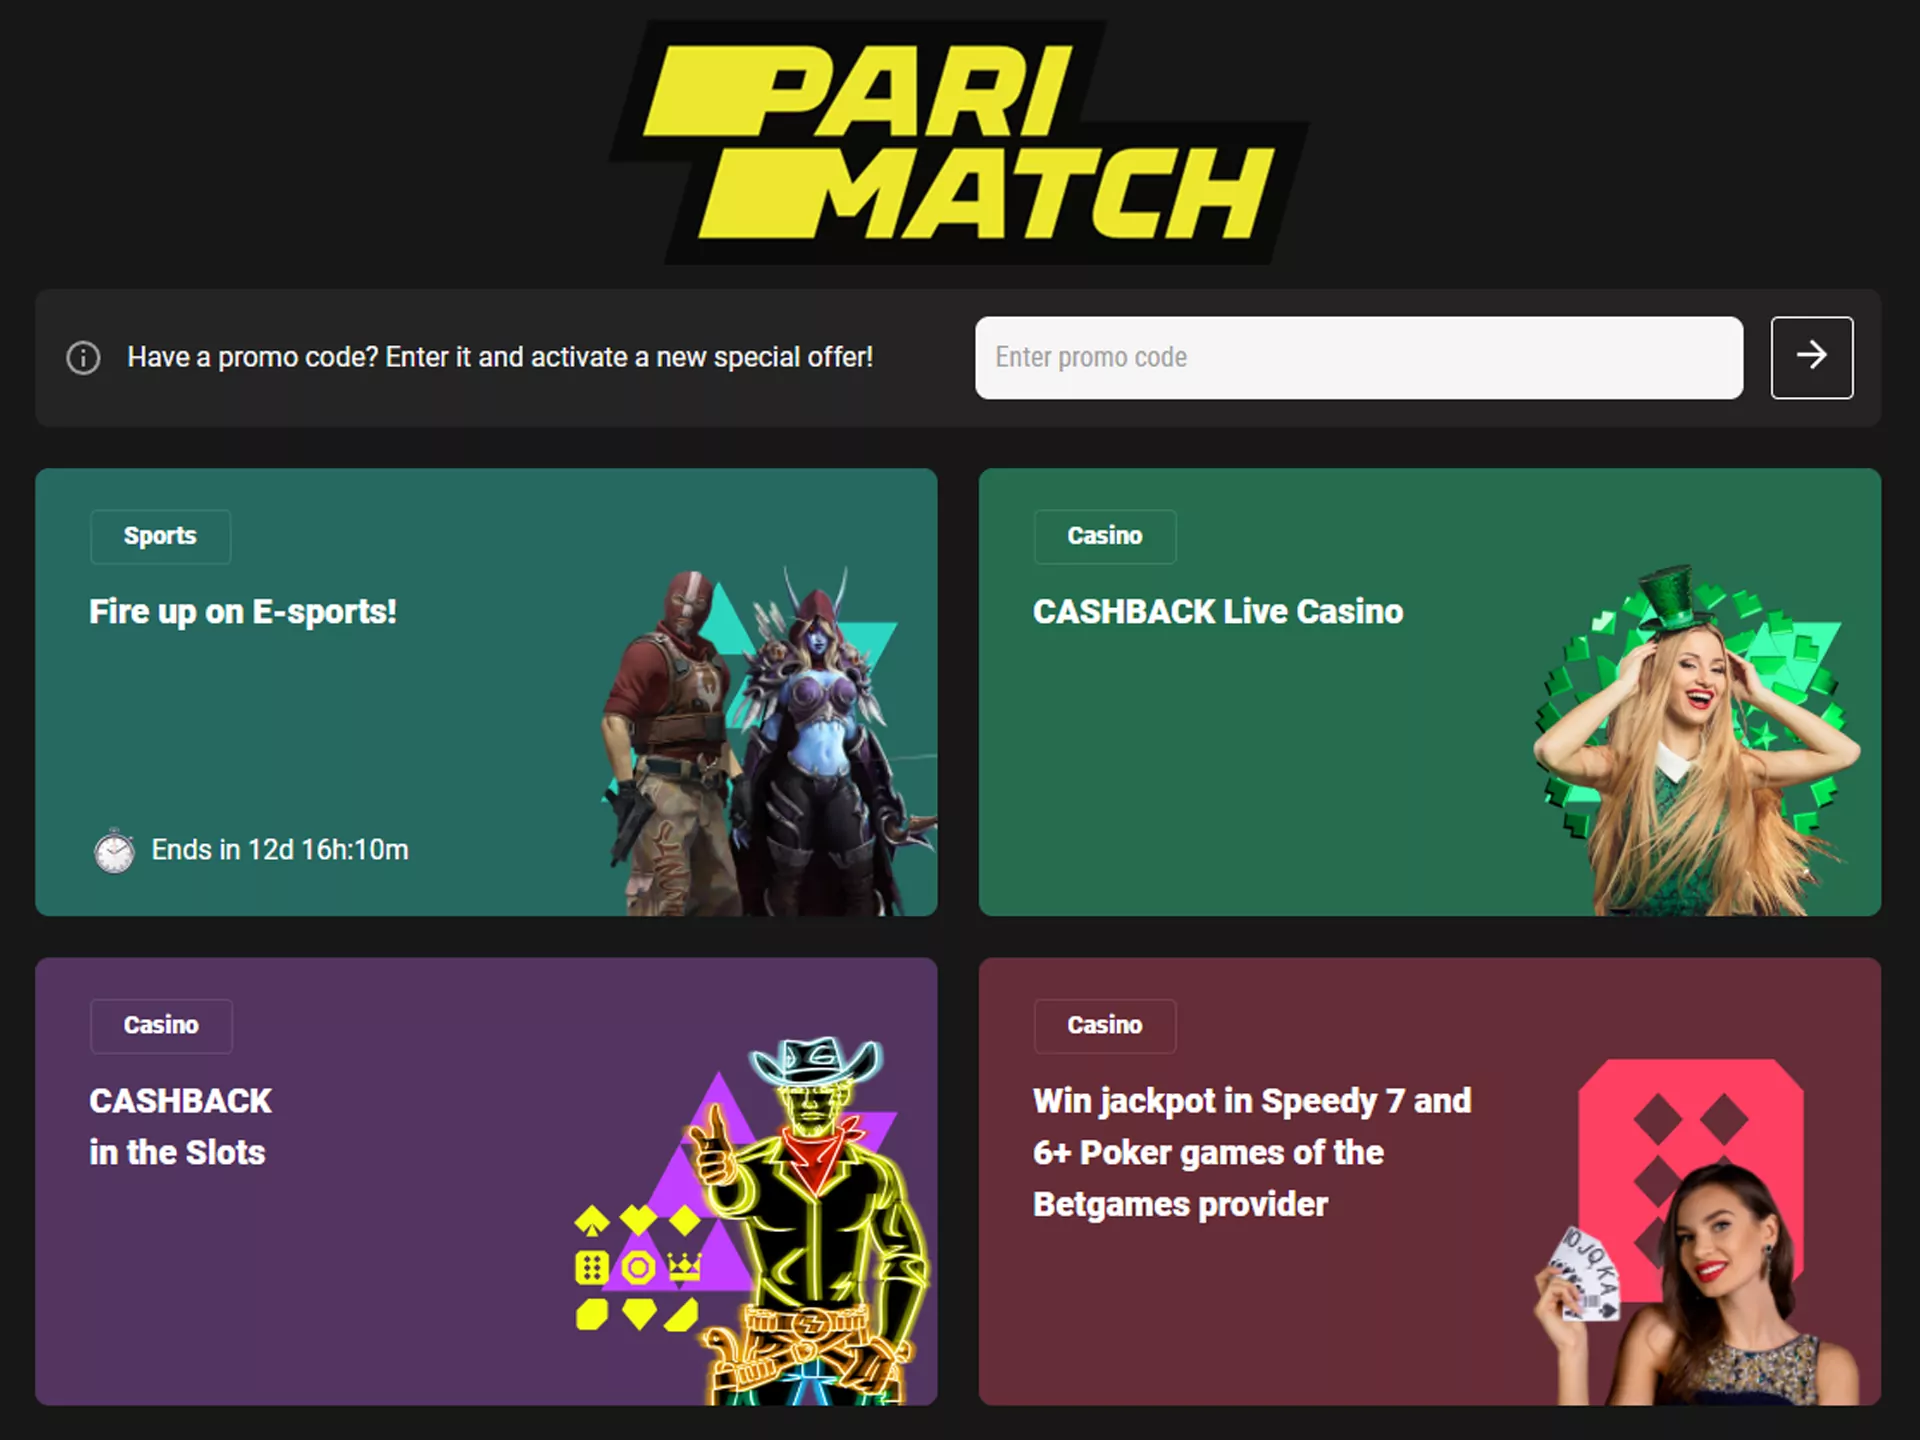 Parimatch has different bonuses for new and